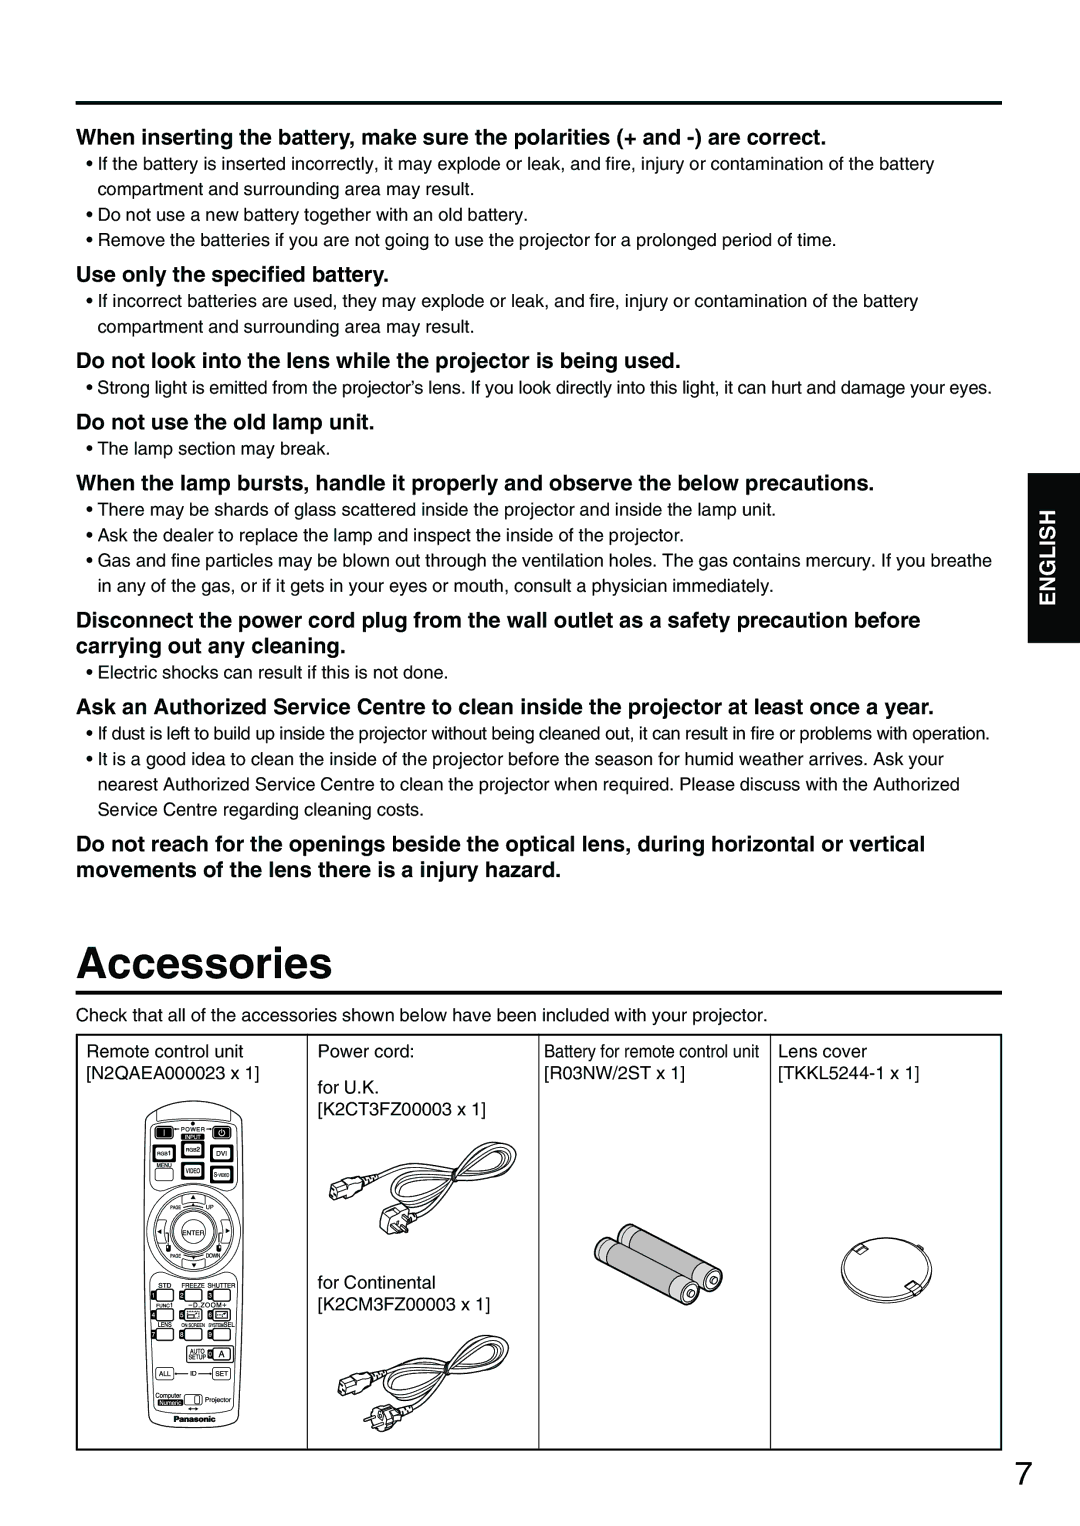 Panasonic PT-D3500E manual Accessories, Use only the specified battery, Do not use the old lamp unit 